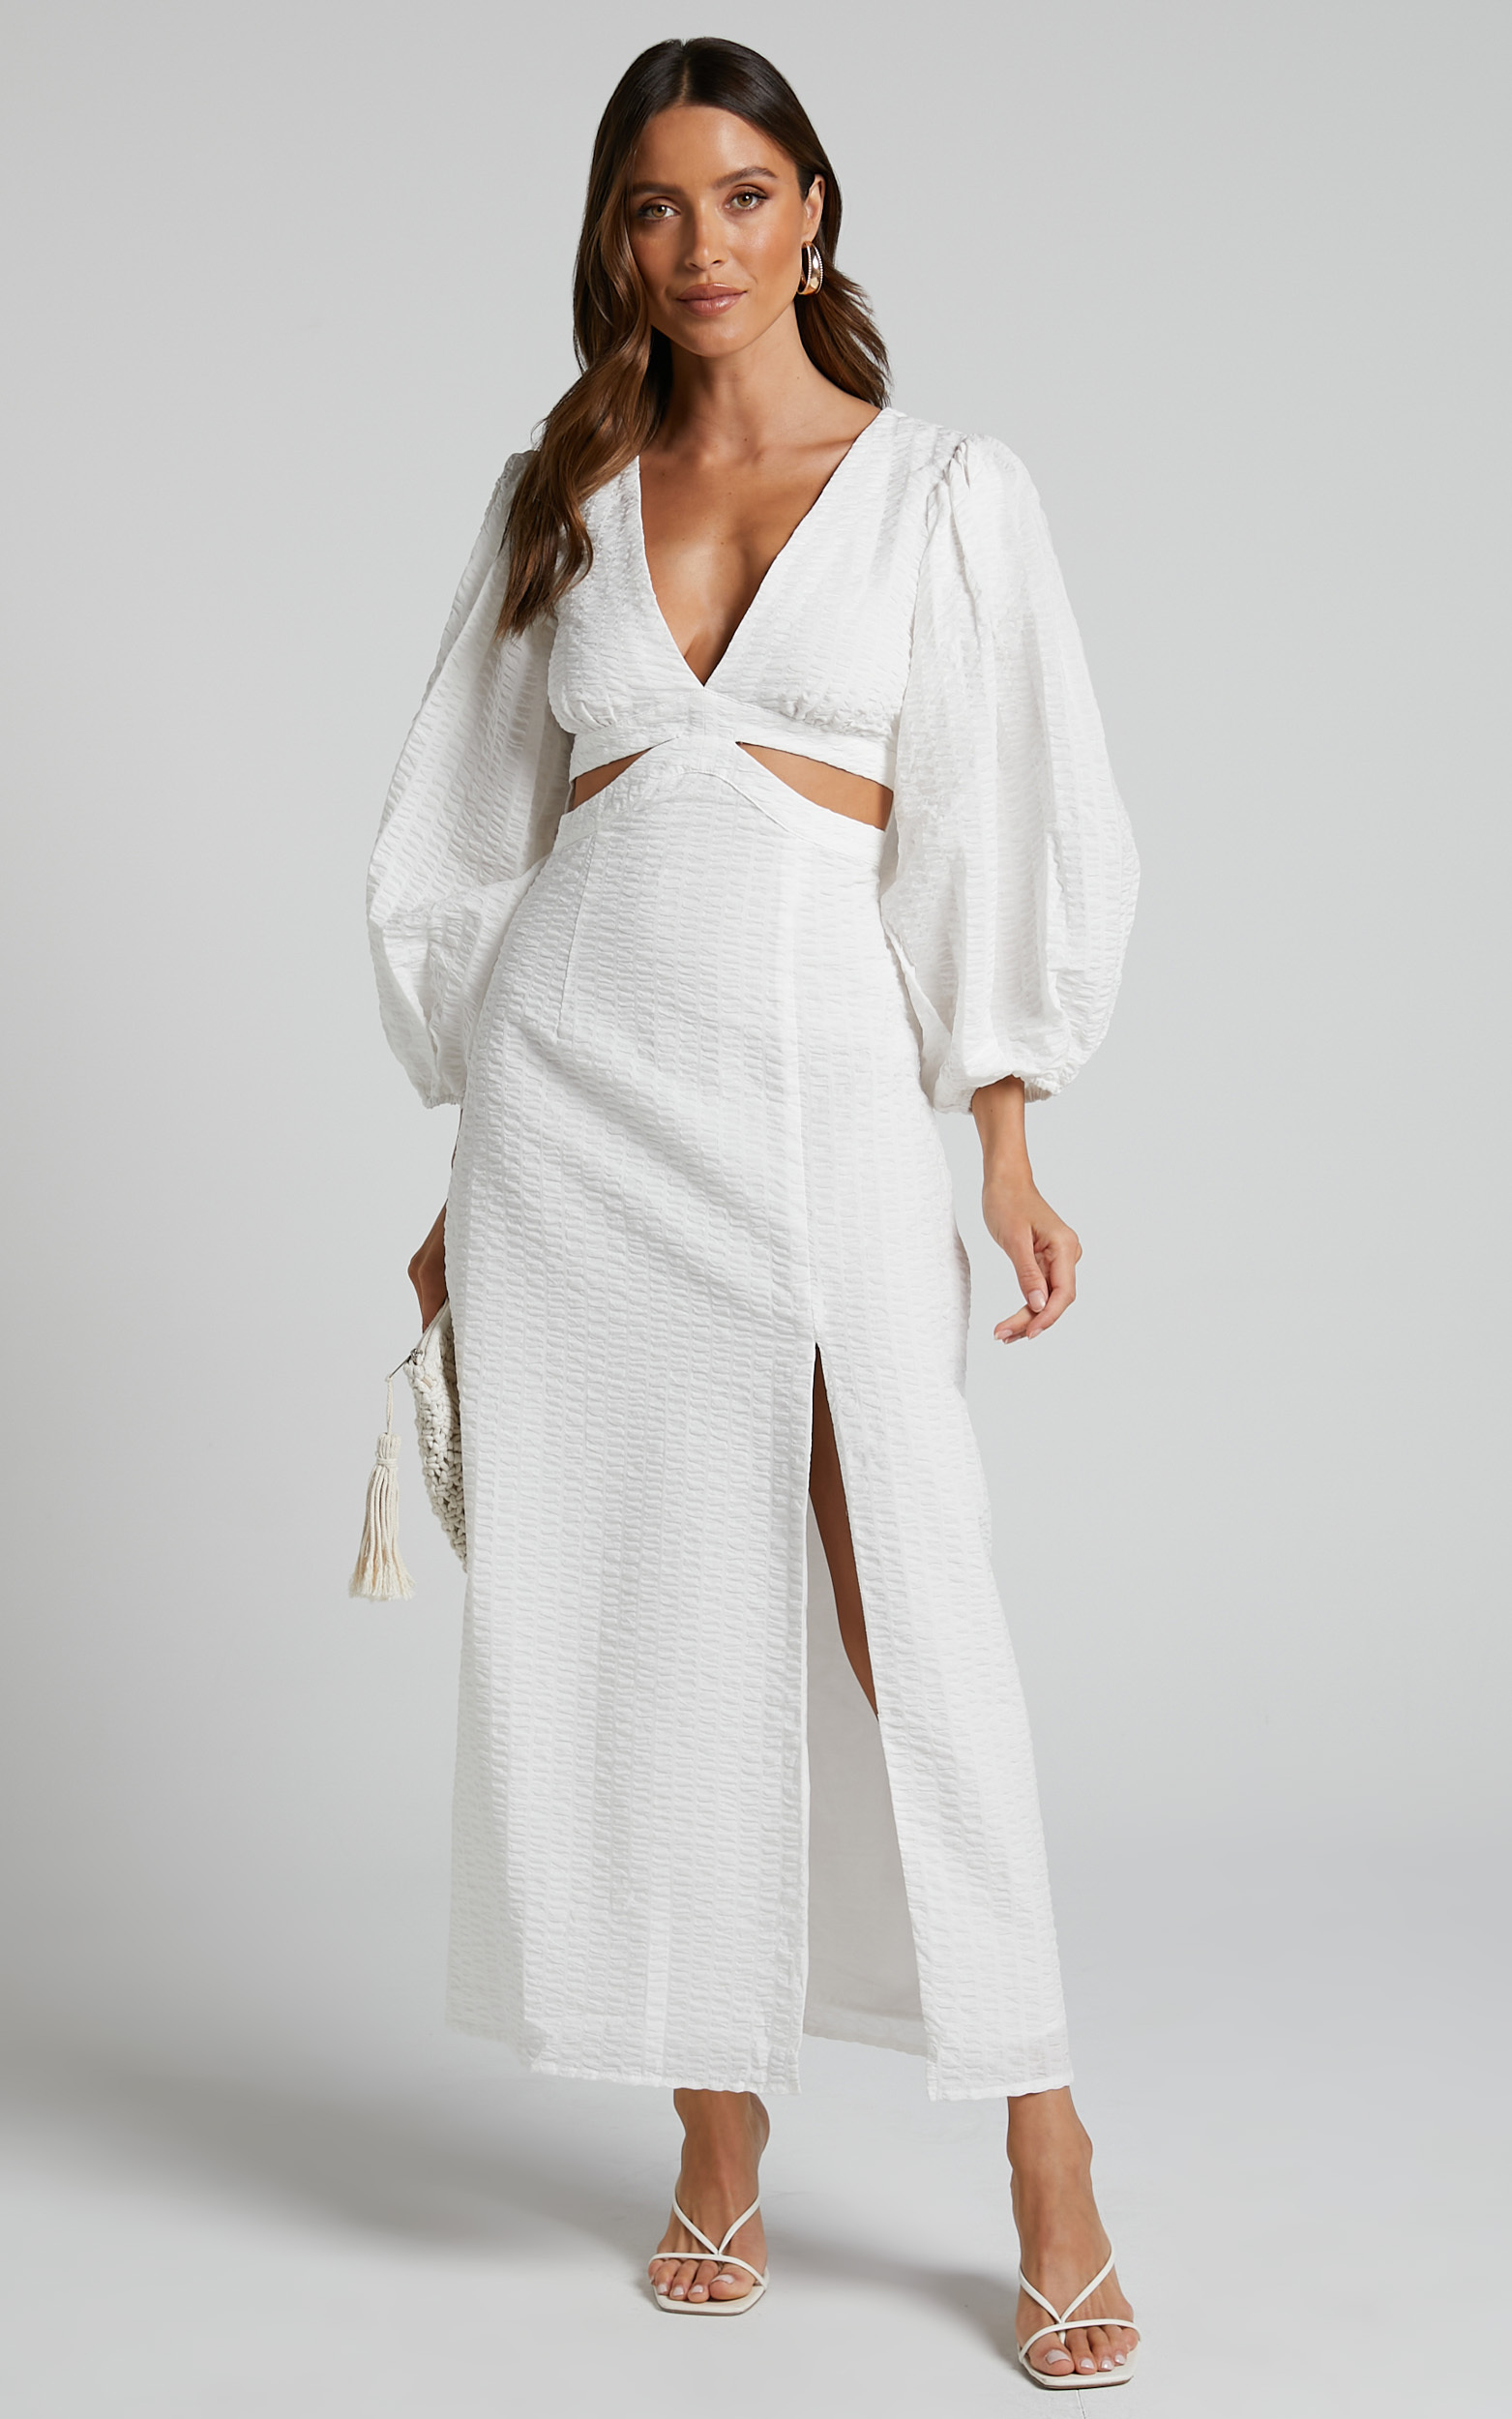 Miggy Midi Dress - Puff Sleeve Cut Out Split Dress in White - 06, WHT2, hi-res image number null